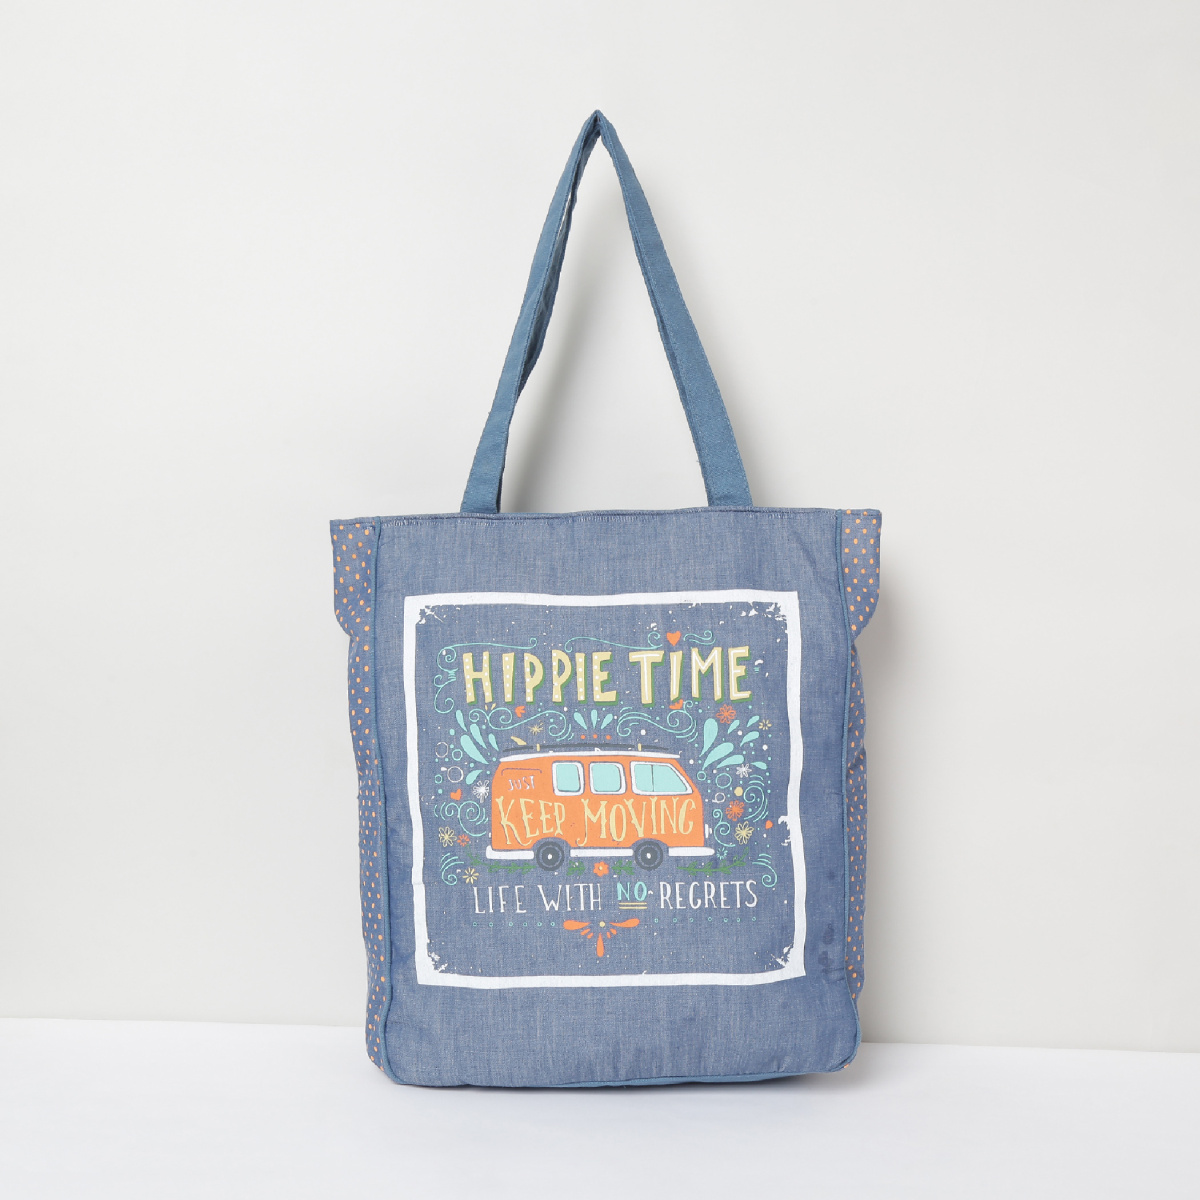 Tote bag | Another Graphic - graphic design & typography inspiration